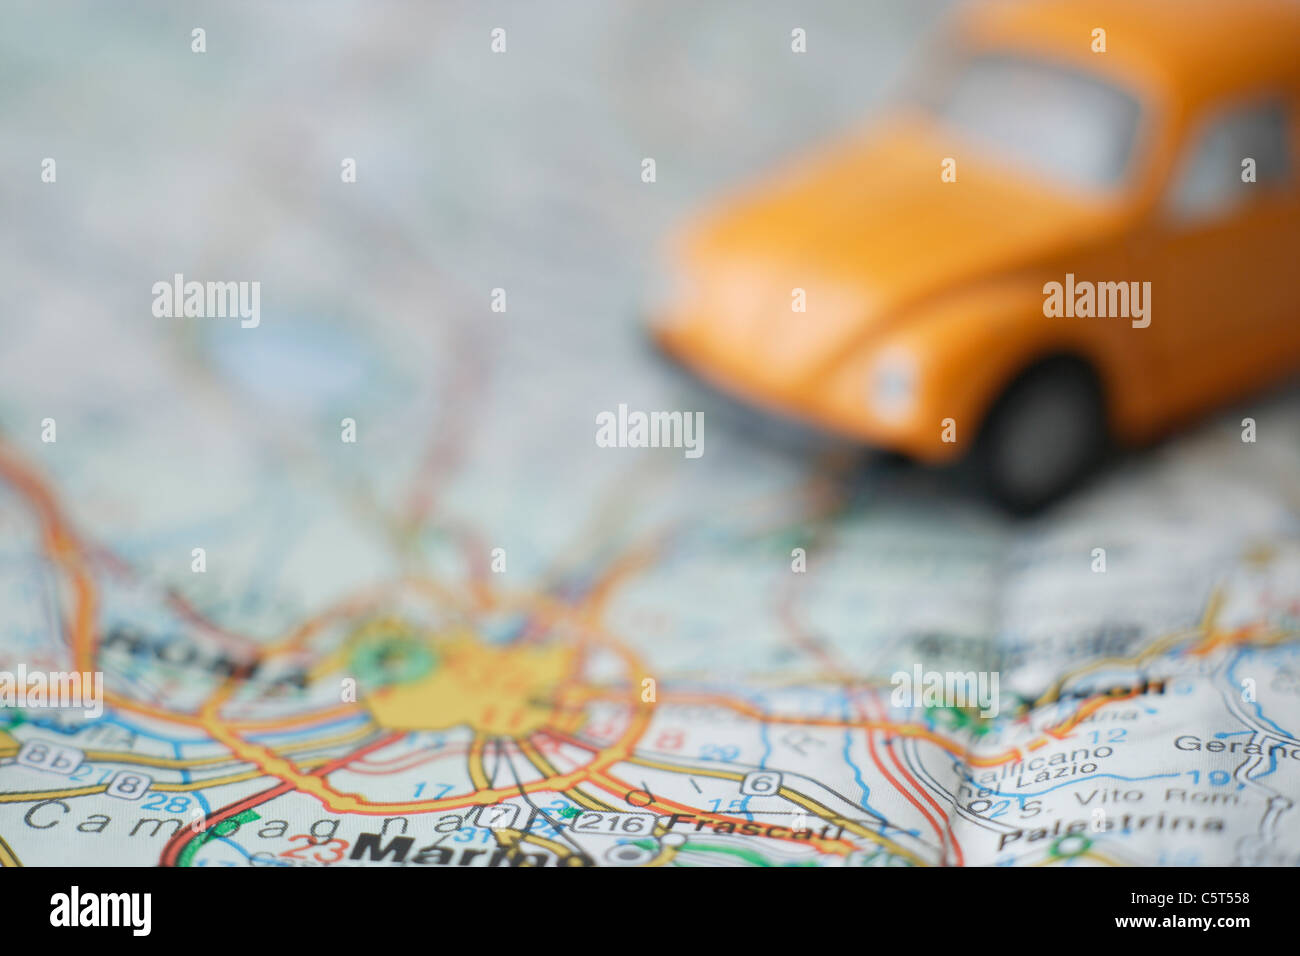 Italy, Rome, Close up of beetle toy car on road map Stock Photo